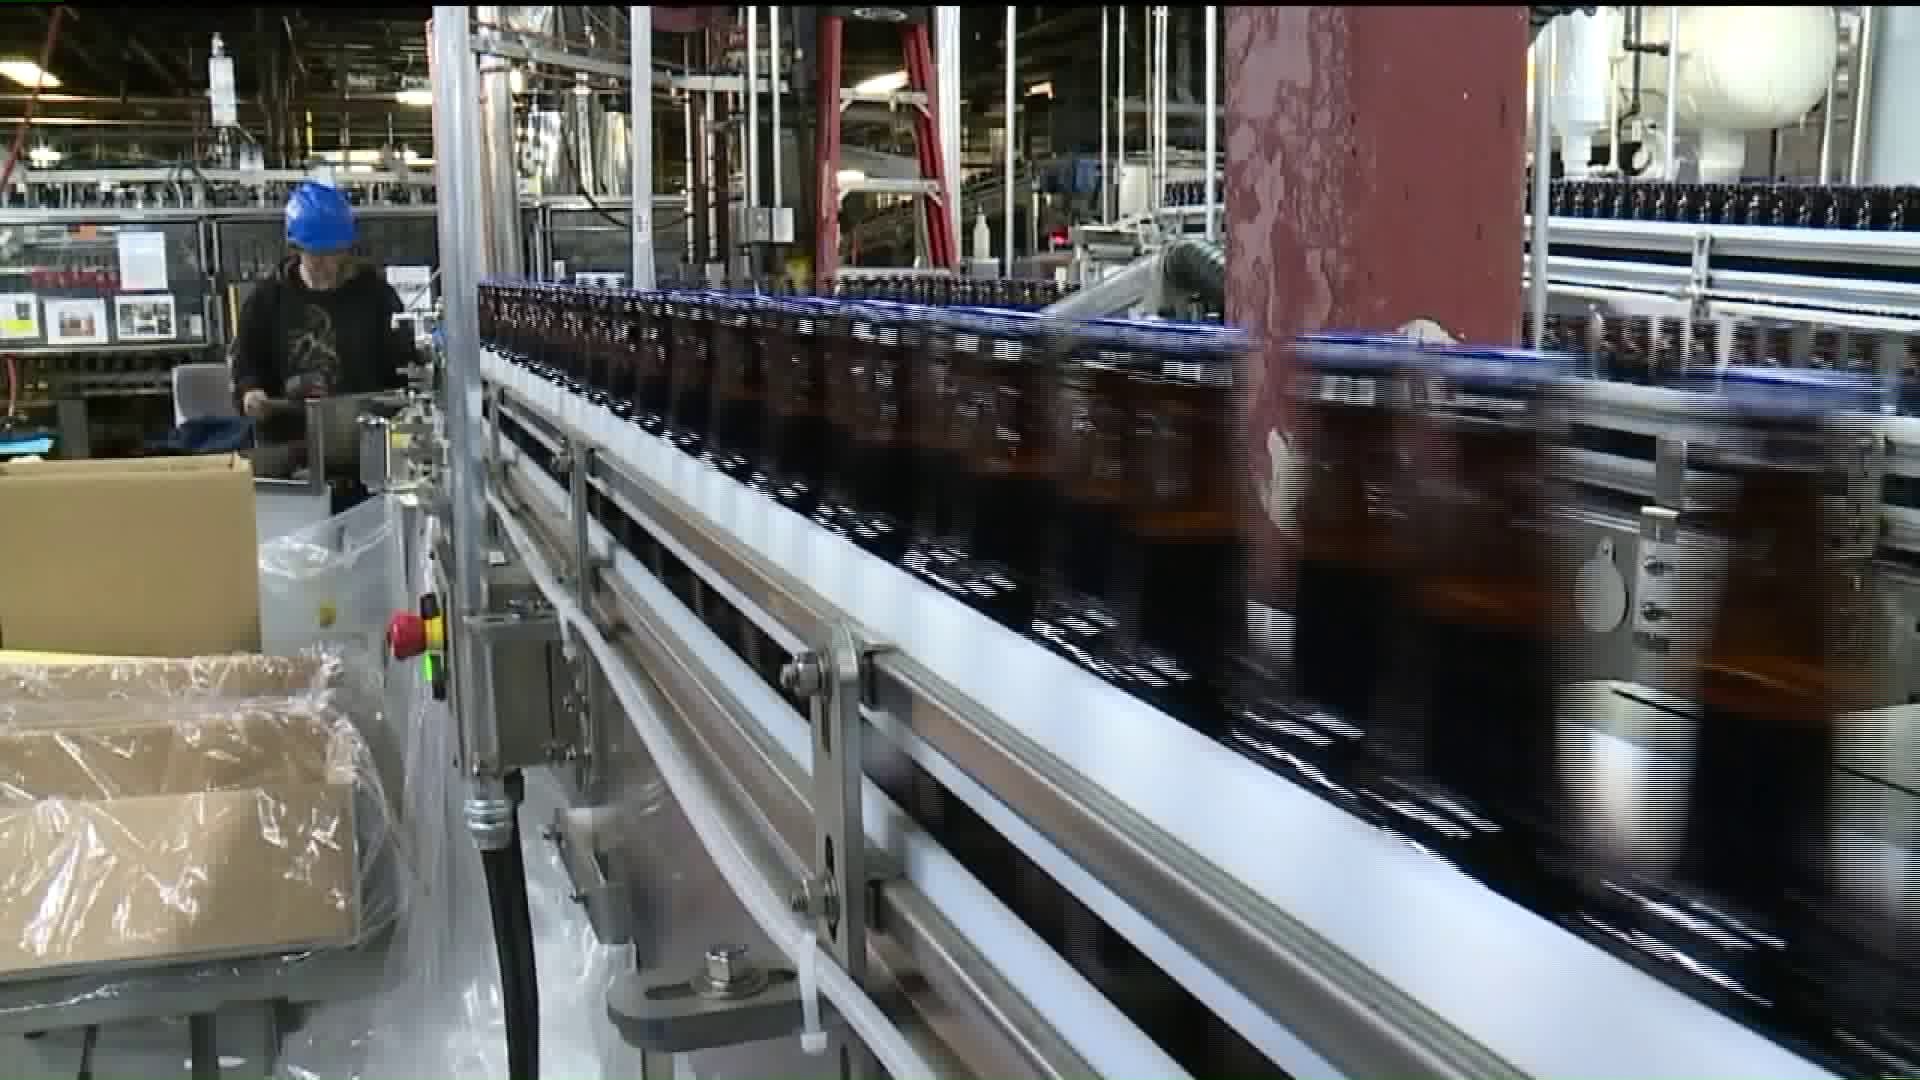 Inside Look at New State-of-the-Art Equipment in Brewery